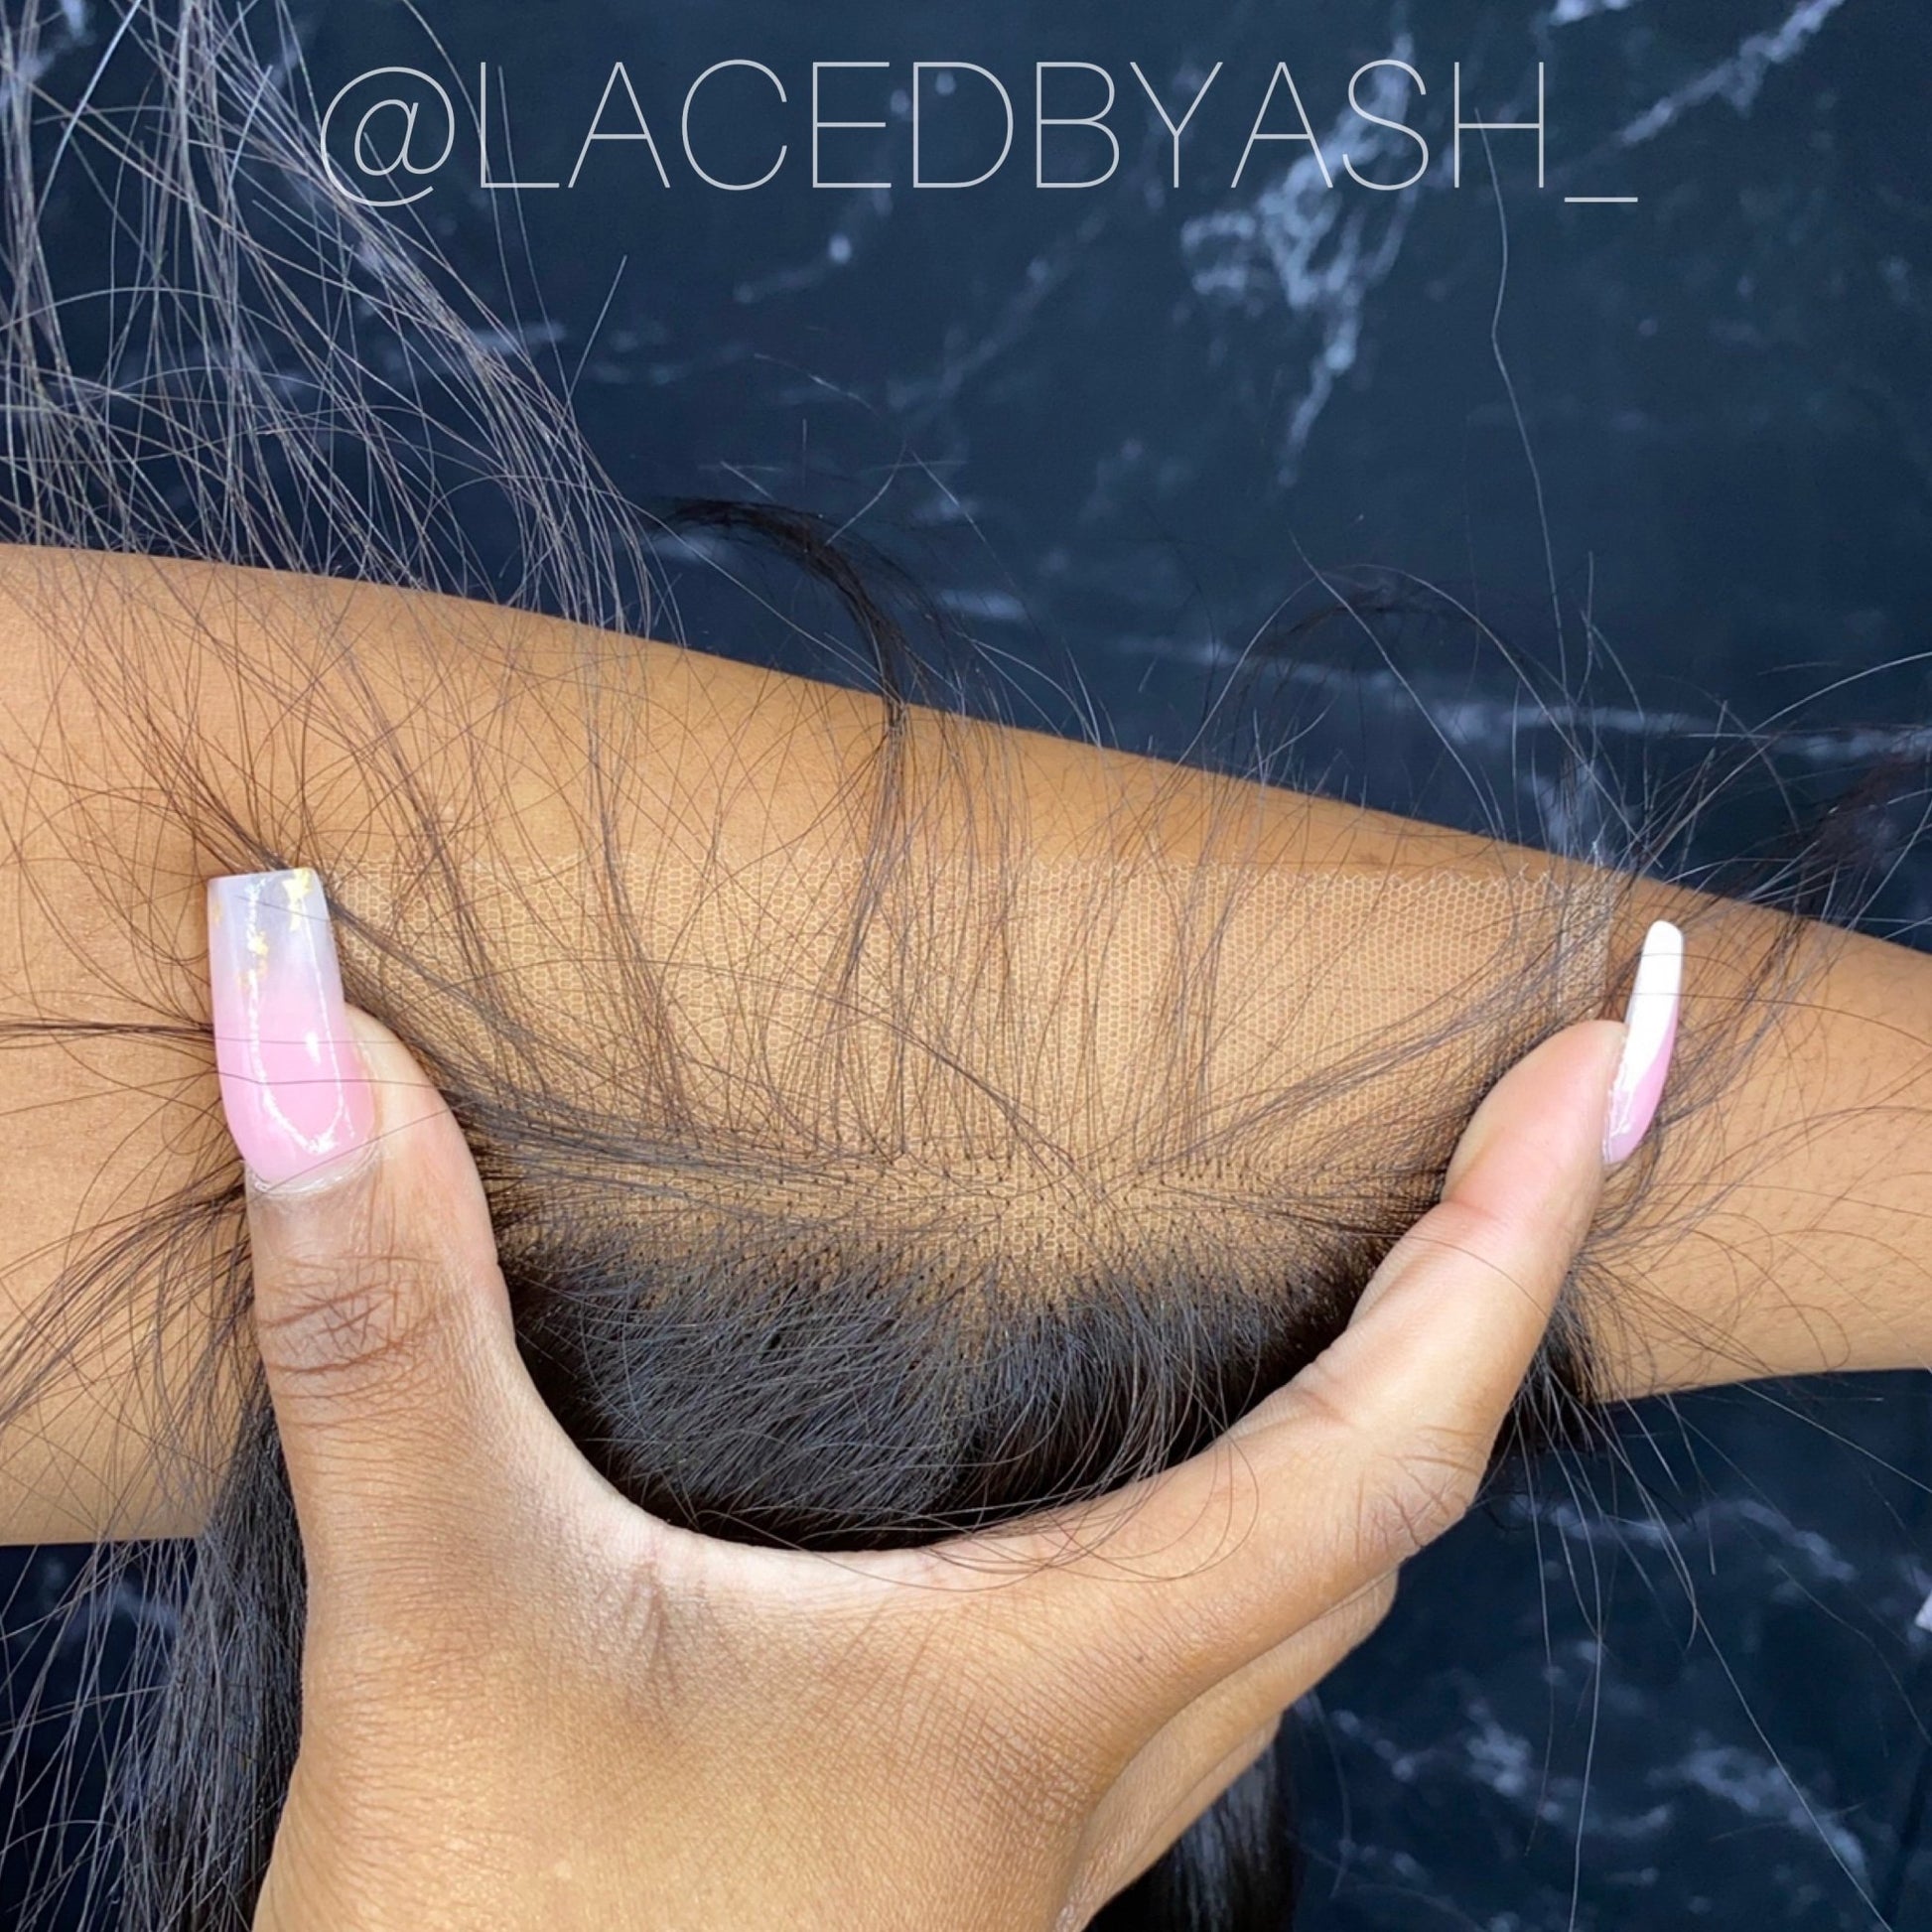 BODY WAVE HD LACE CLOSURE - Laced by Ash